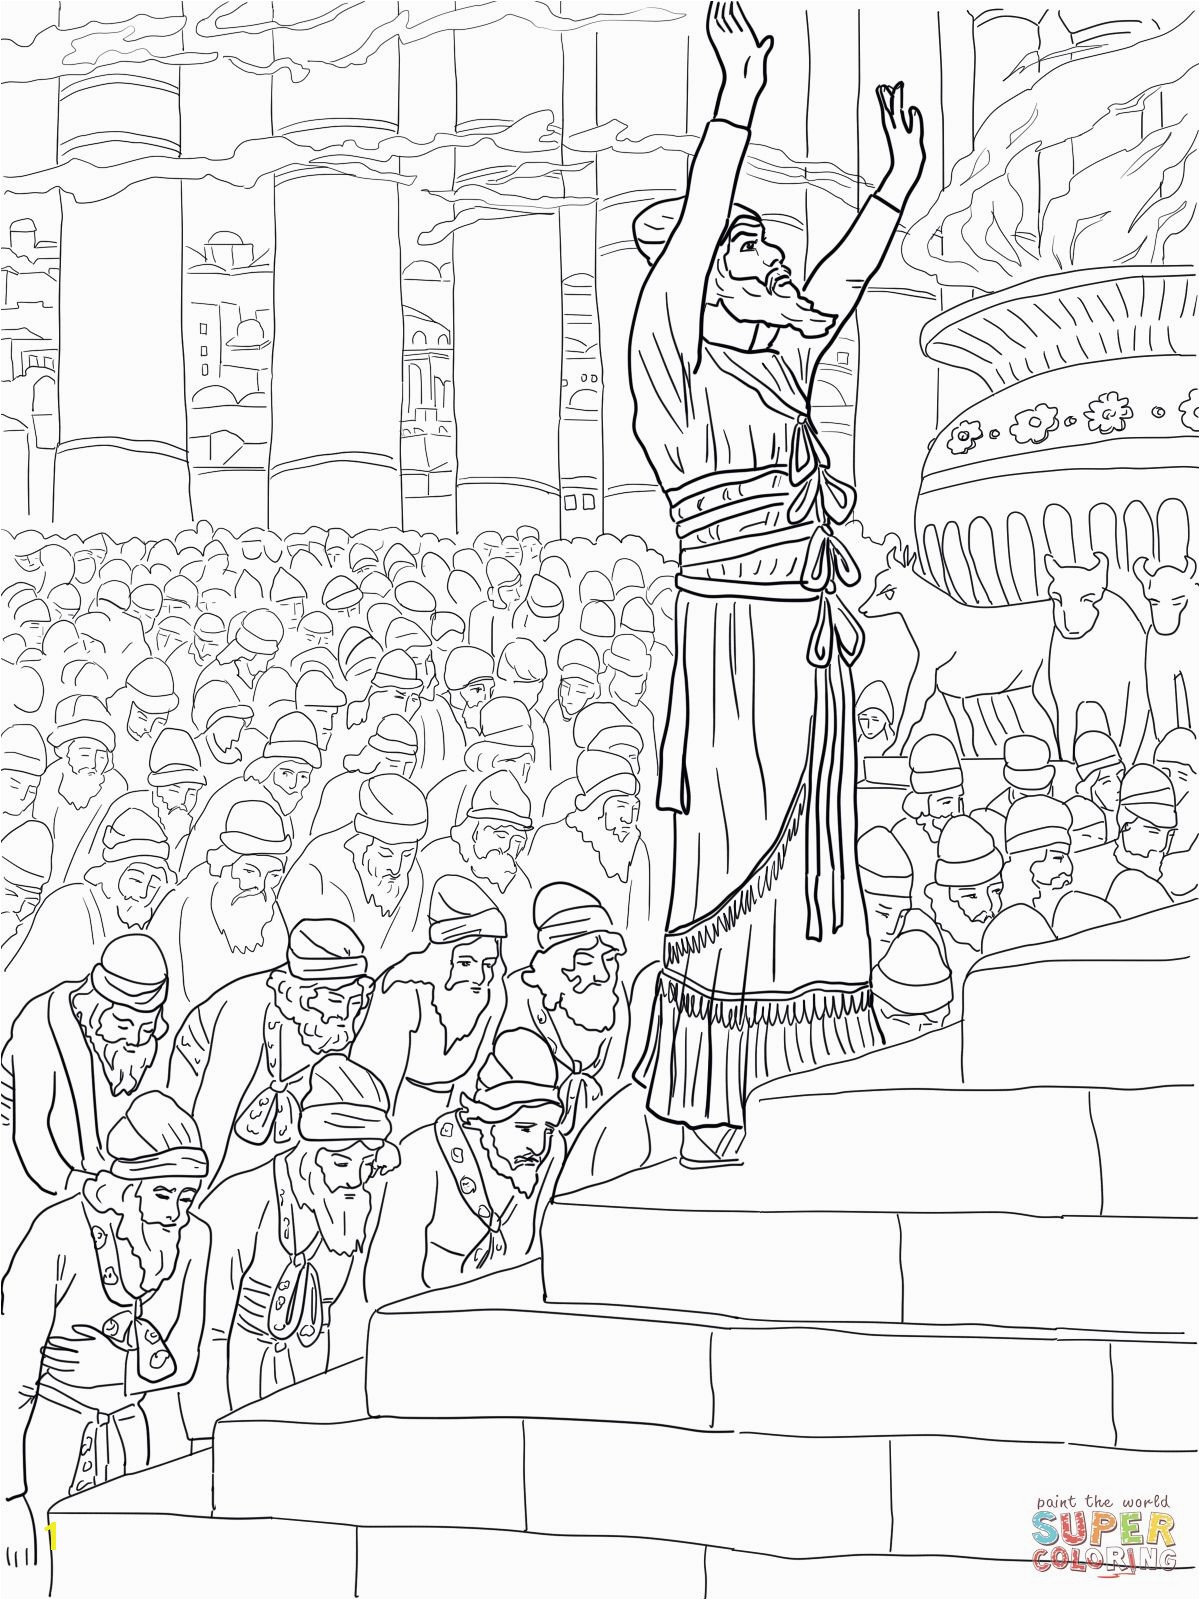 Solomon Prayer in the Temple coloring page